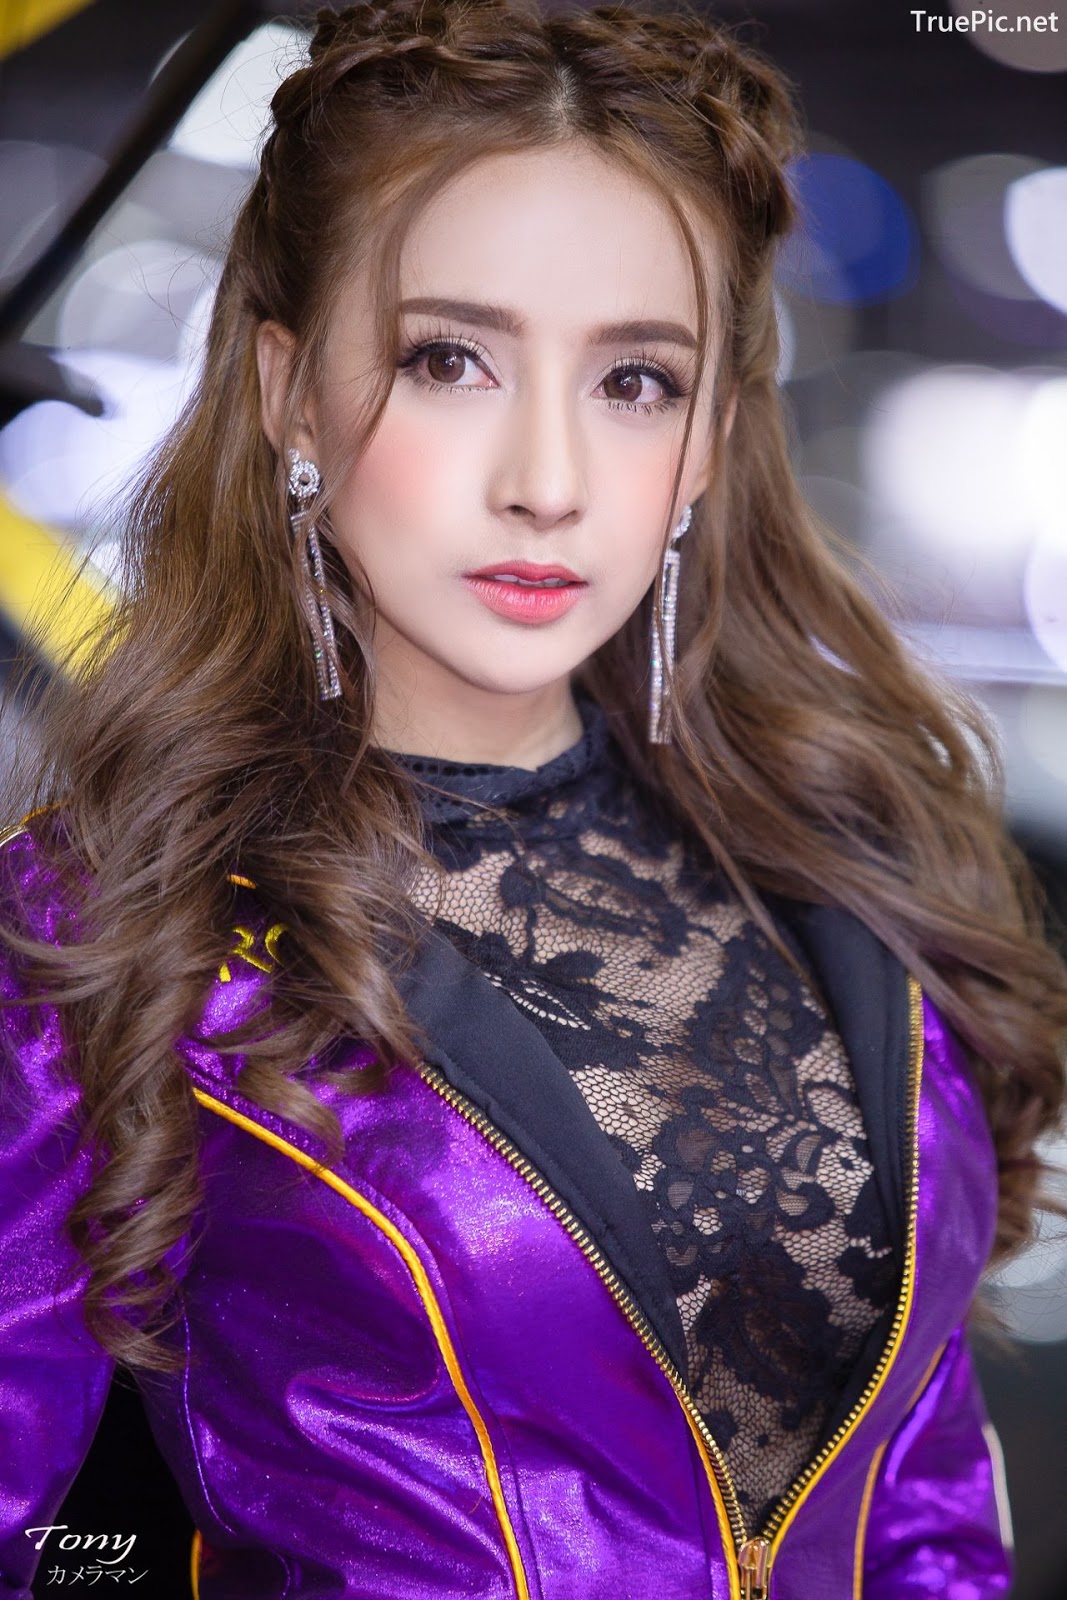 Image-Thailand-Hot-Model-Thai-Racing-Girl-At-Motor-Expo-2019-TruePic.net- Picture-54